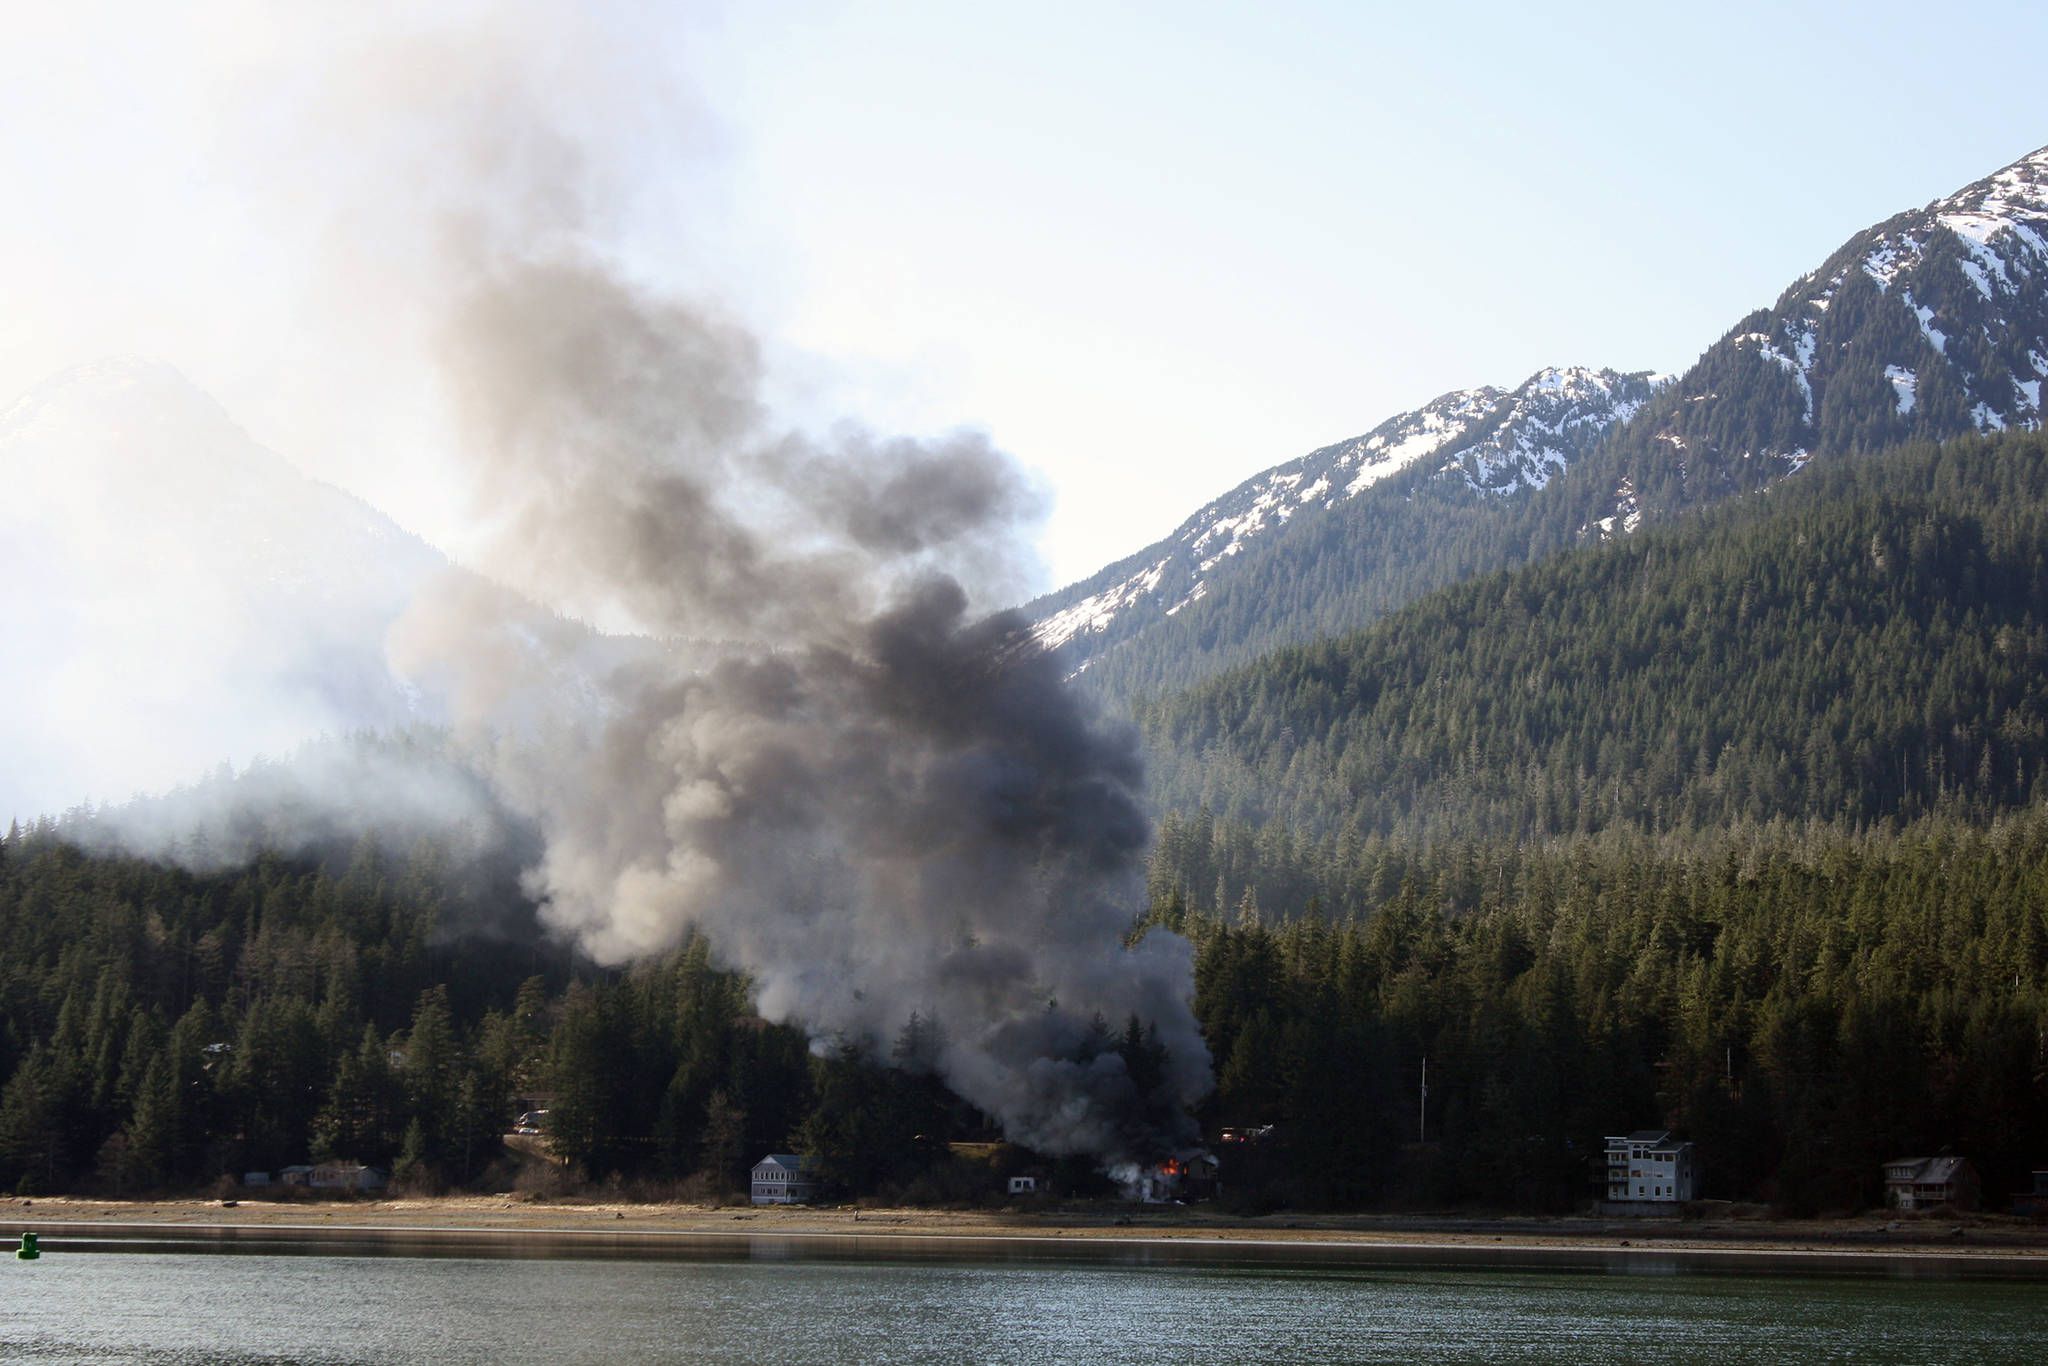 A house fire is seen on North Douglas from the view across Gastineau Channel from the Juneau Empire offices, Thursday, March 28, 2019. (Emily Russo Miller | Juneau Empire)